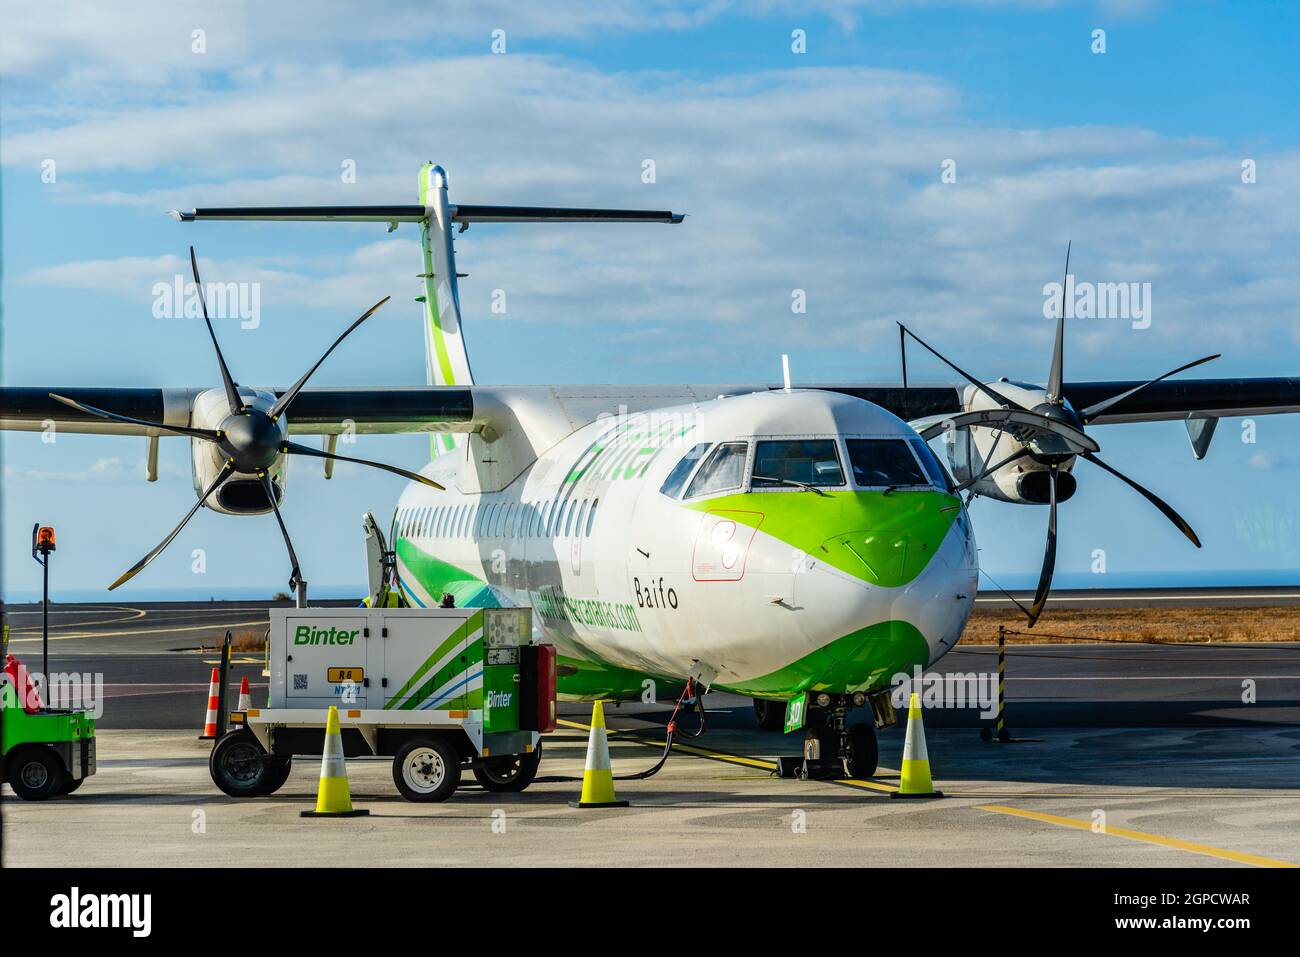 La Gomera, Spain - August 12, 2021: Propeller airplane provisioning on the runway. ATR 72 plane of Binter Canarias Airline Stock Photo